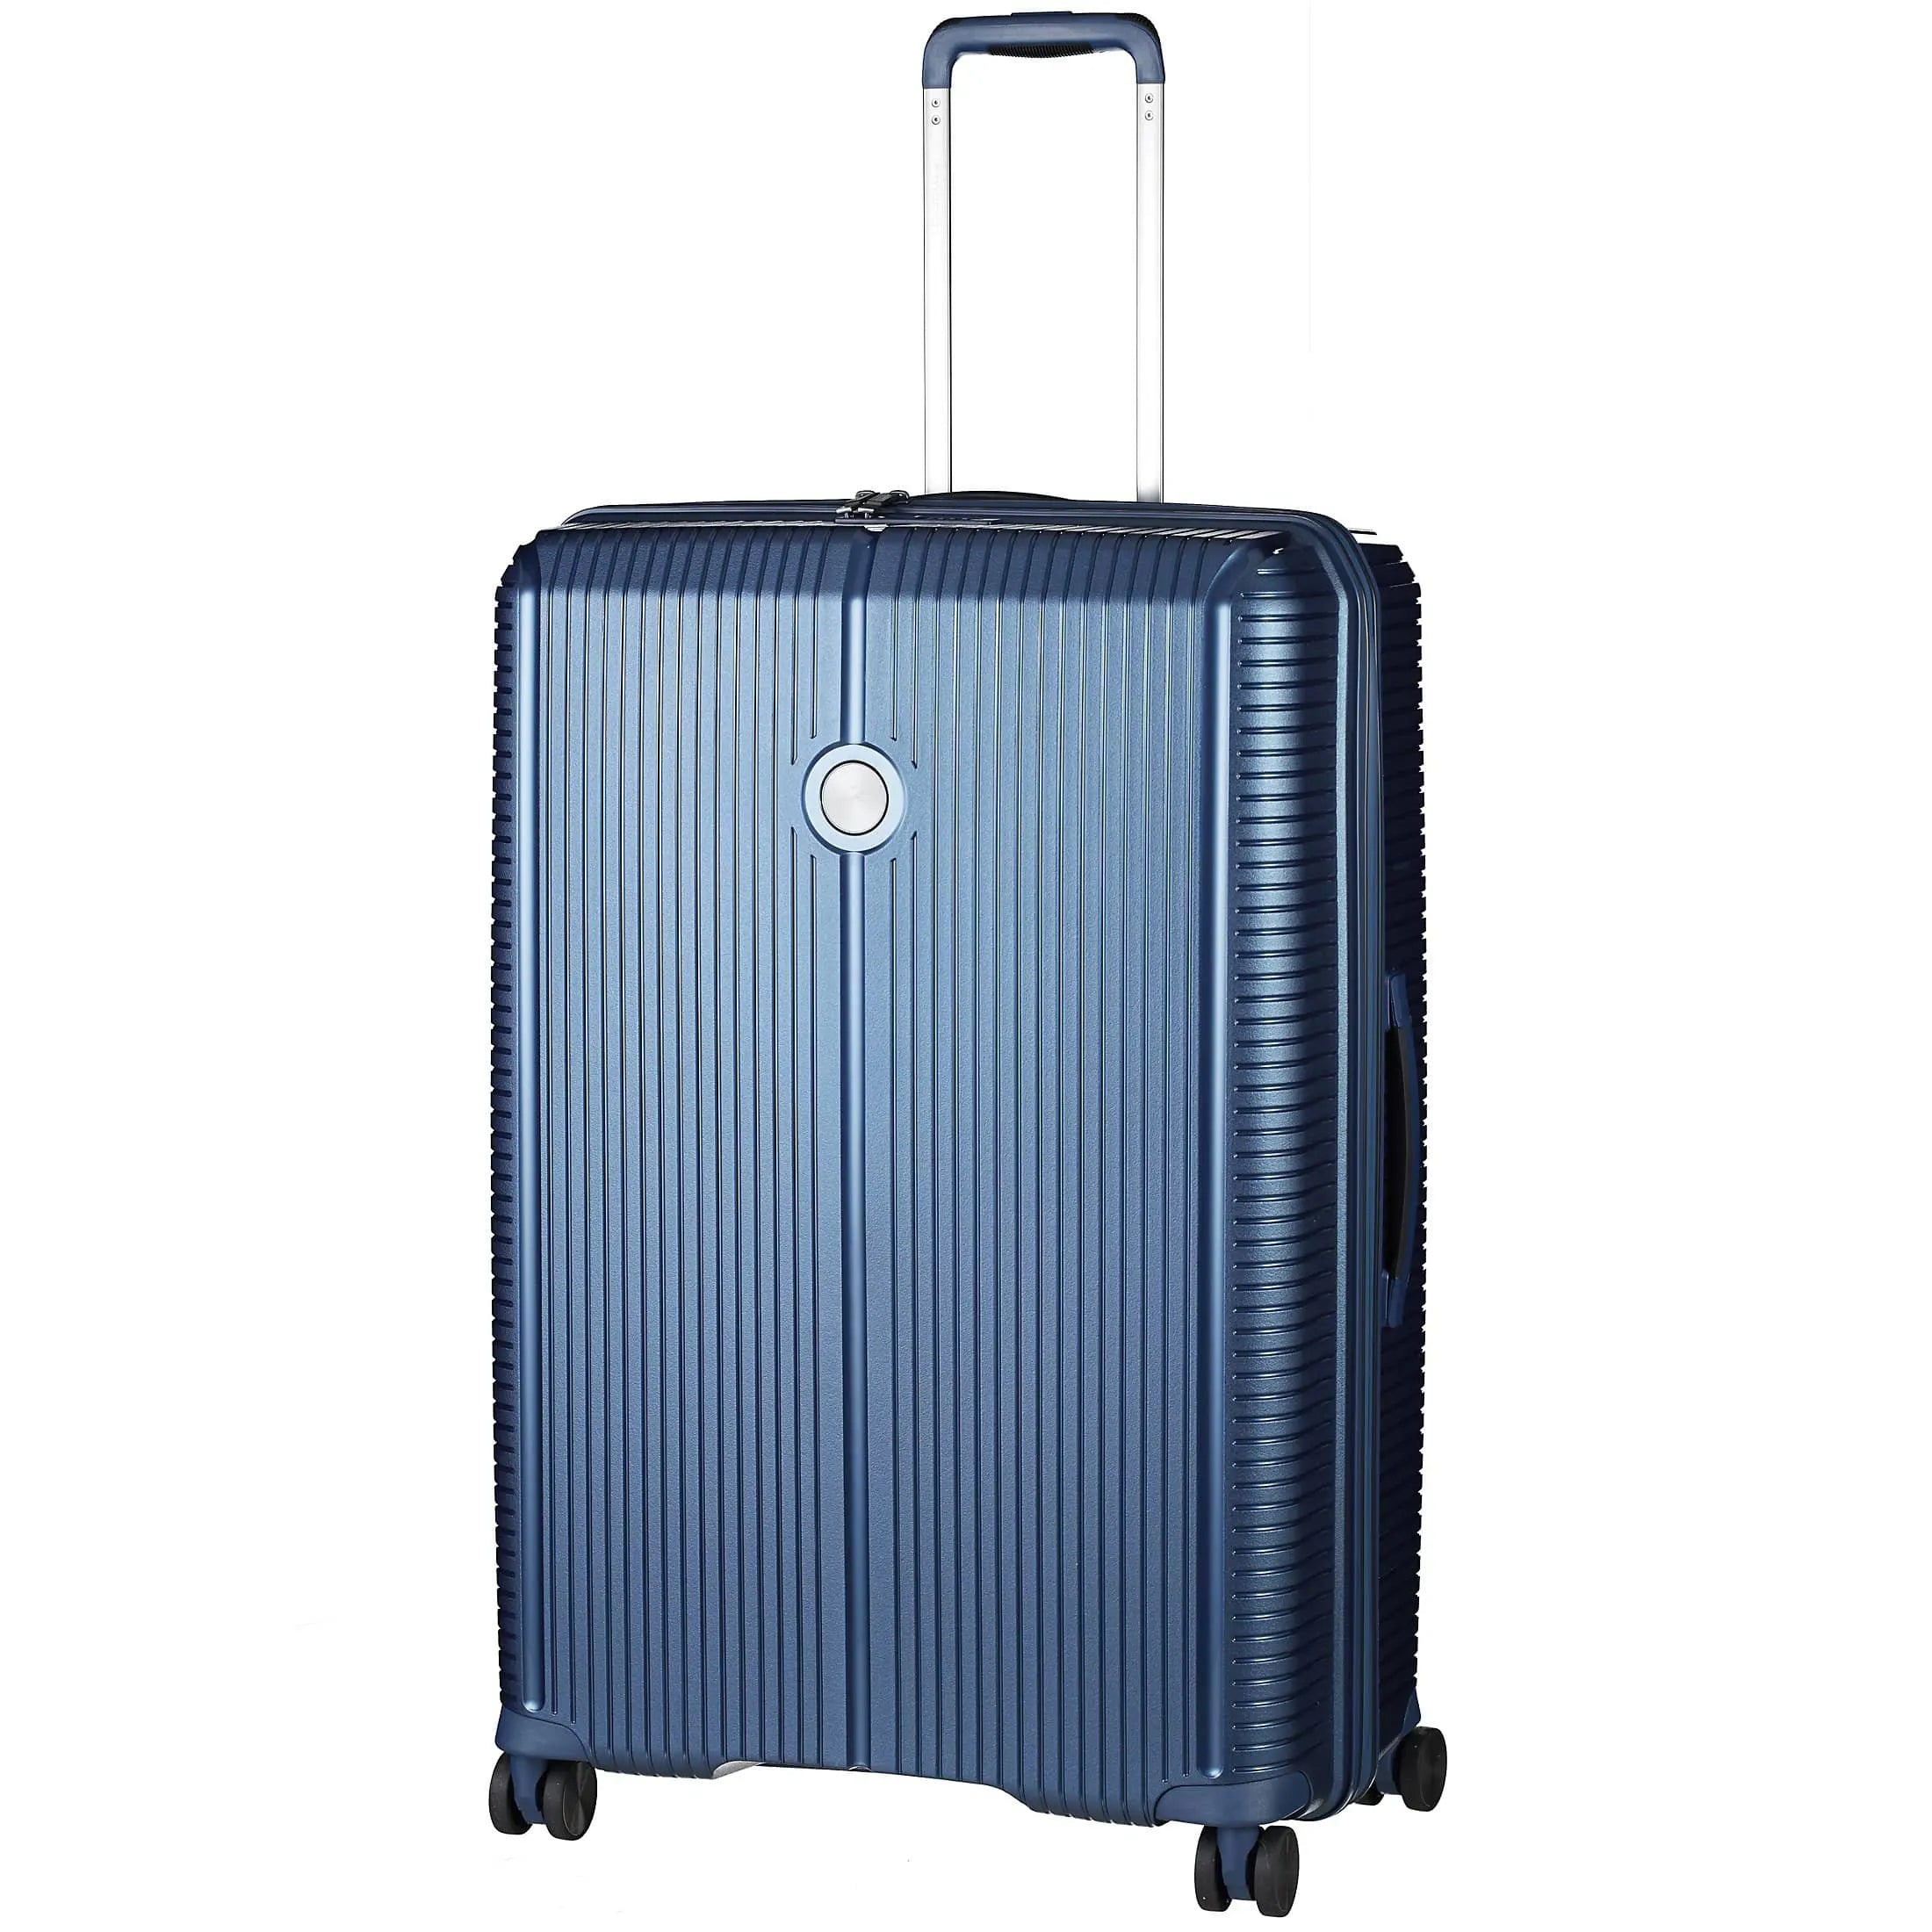 March 15 Trading Canyon 4-wheel trolley 76 cm - orion blue metal